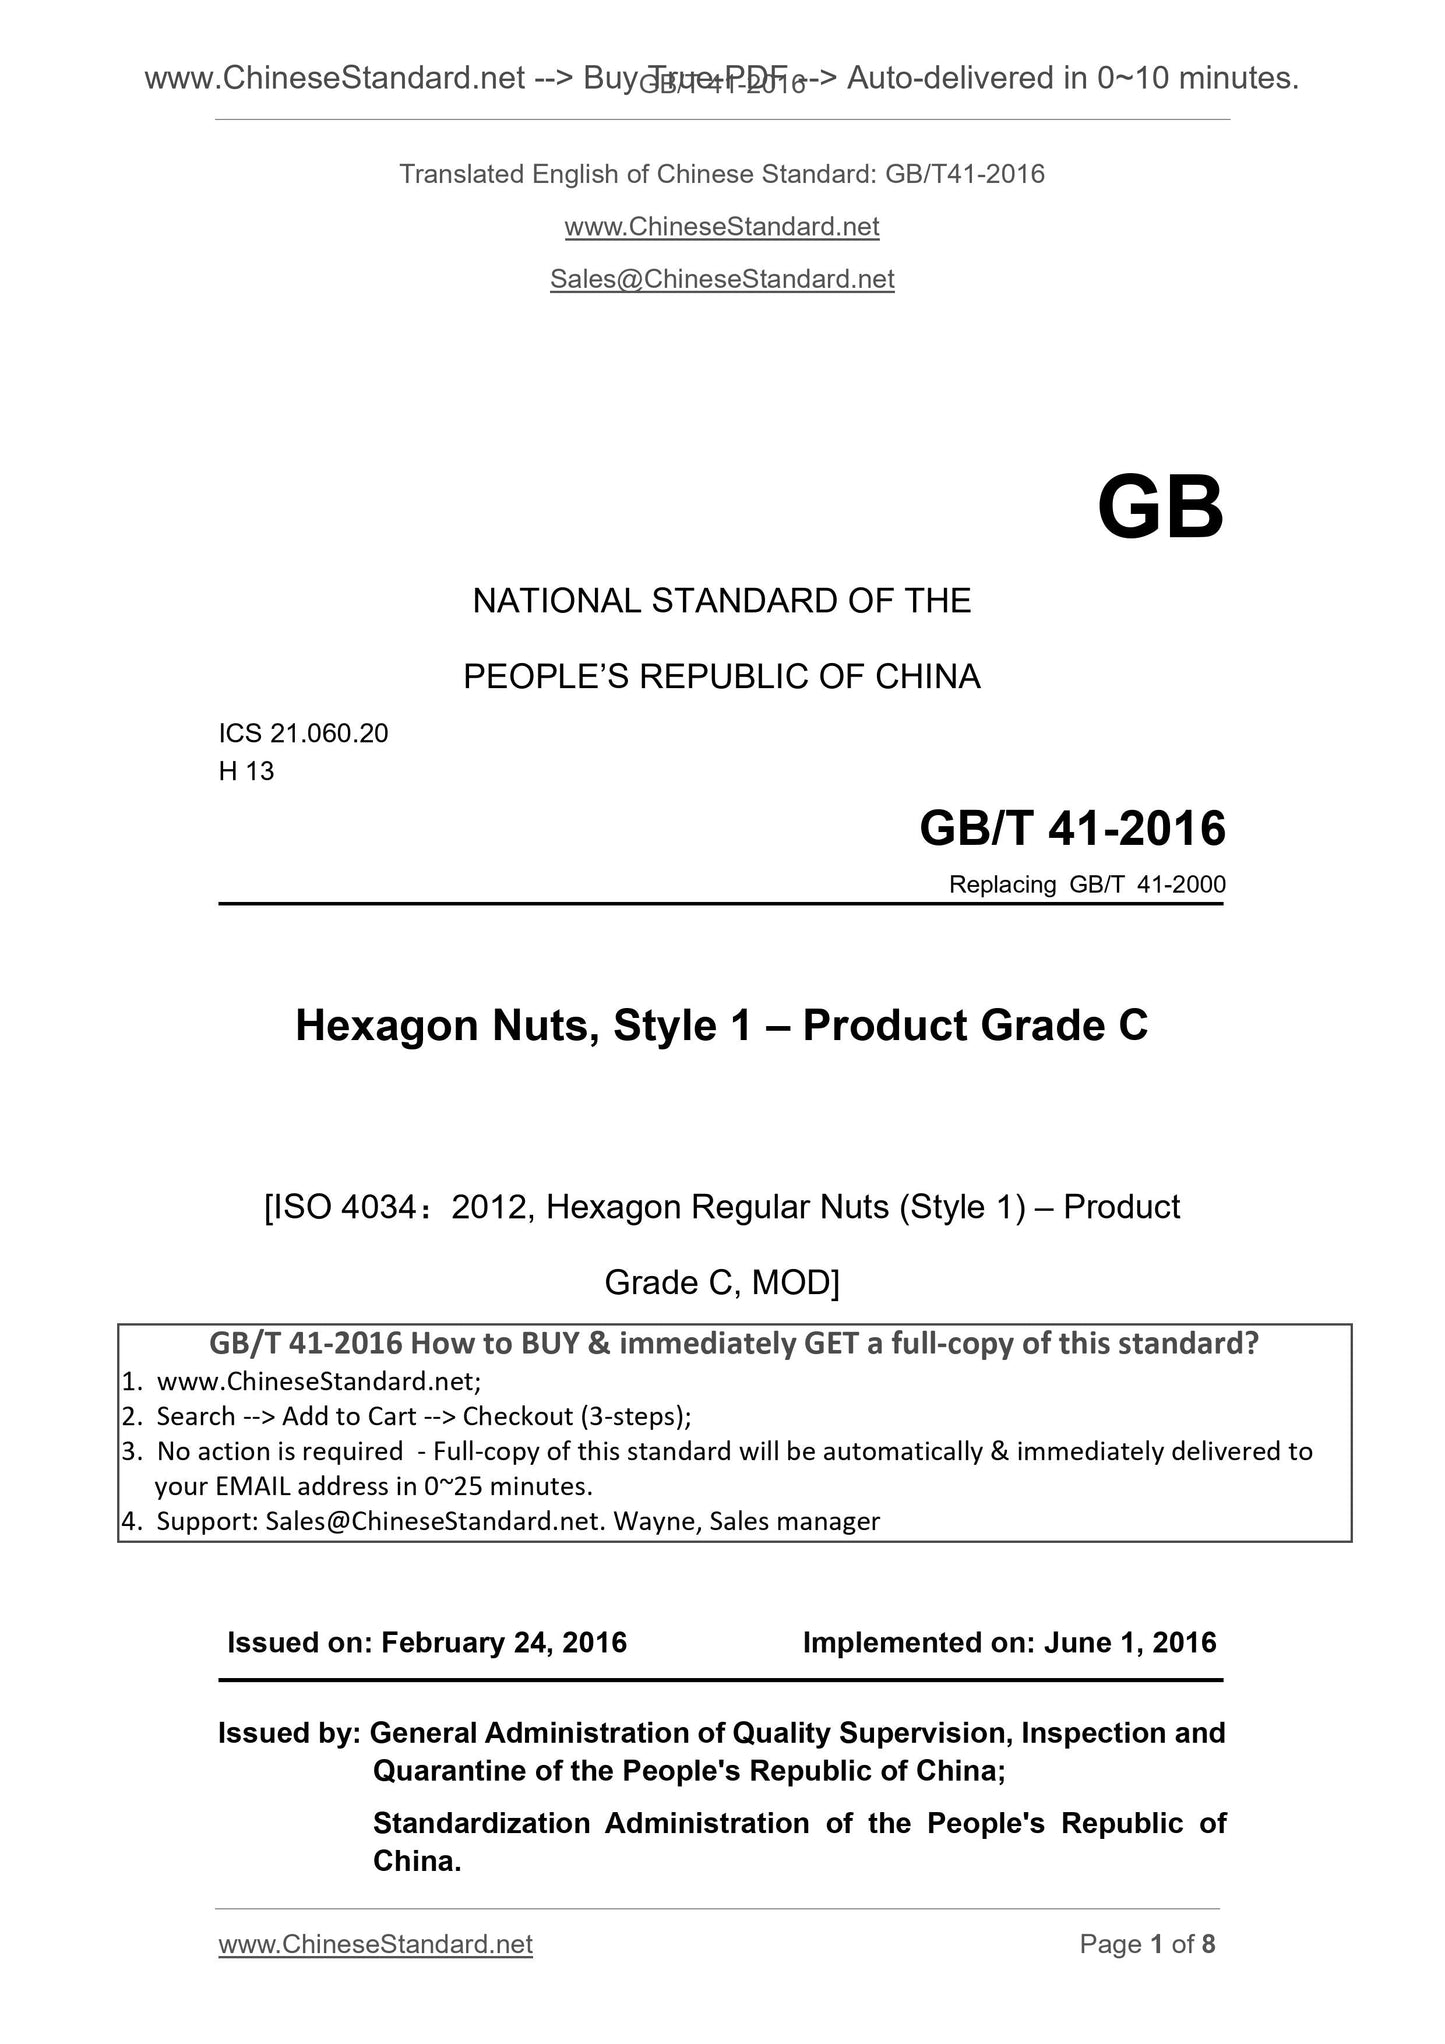 GB/T 41-2016 Page 1